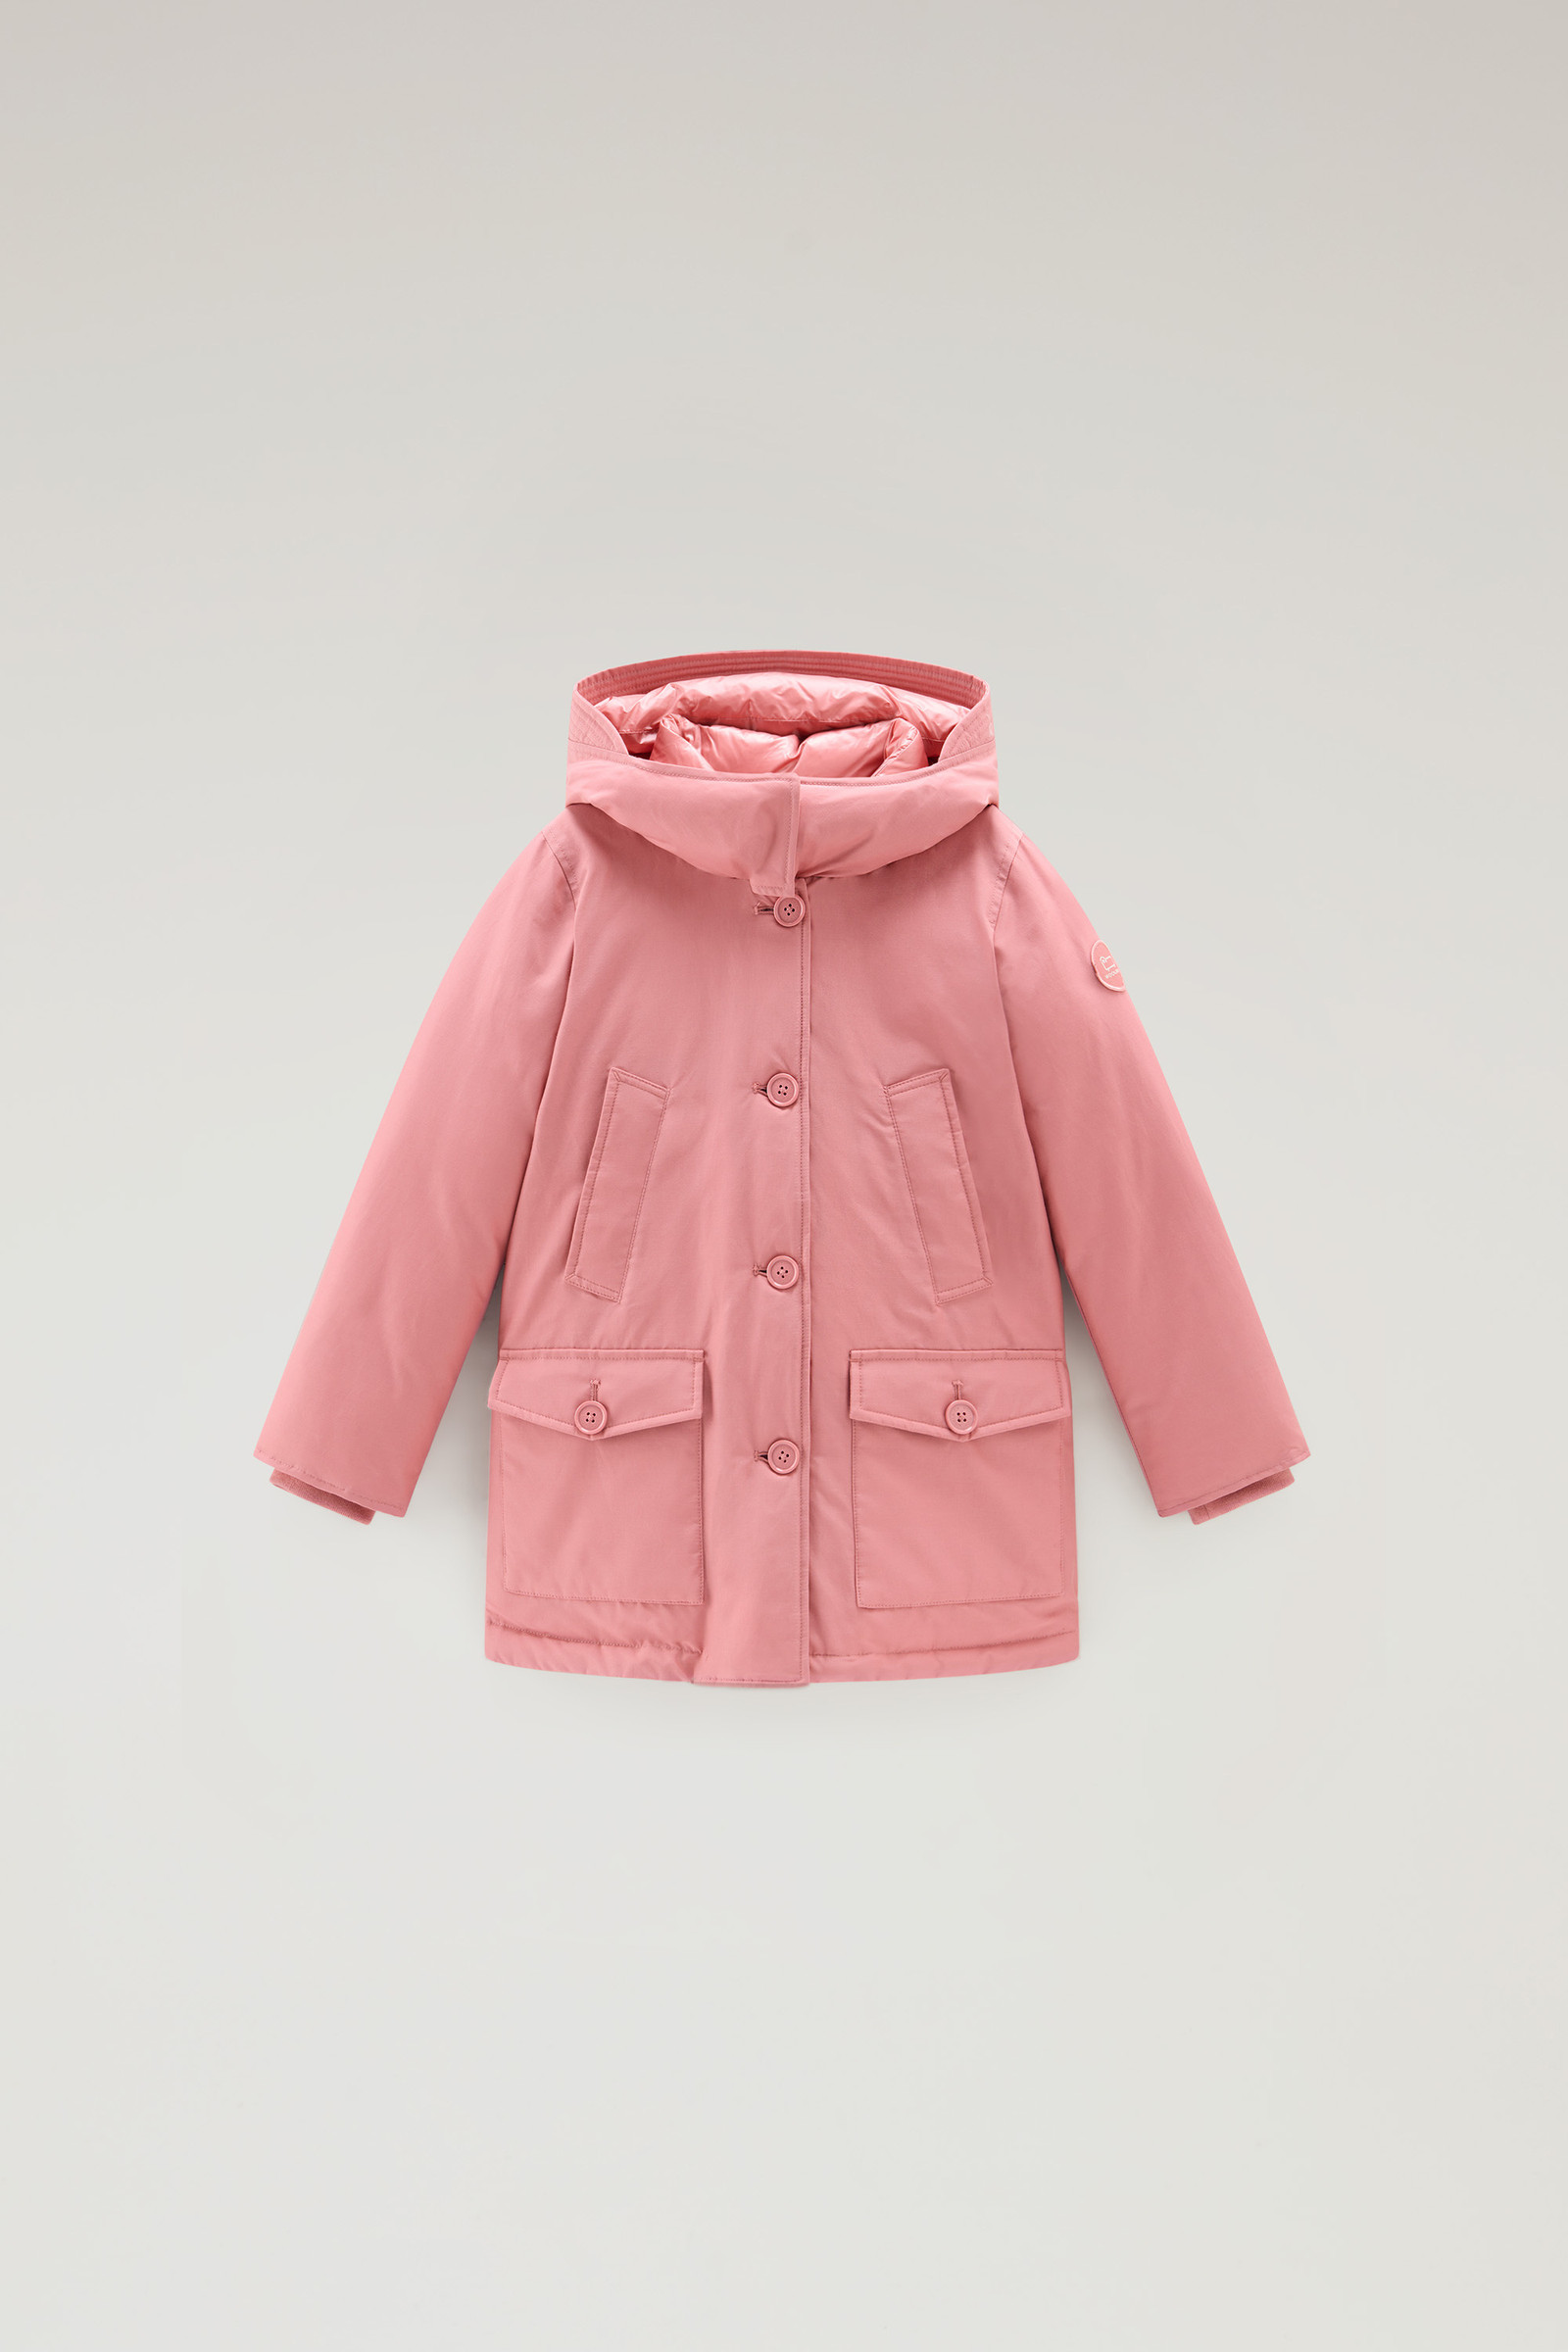 with Satin Arctic Ramar Details Pink Woolrich Girl\'s Parka | USA Cloth in